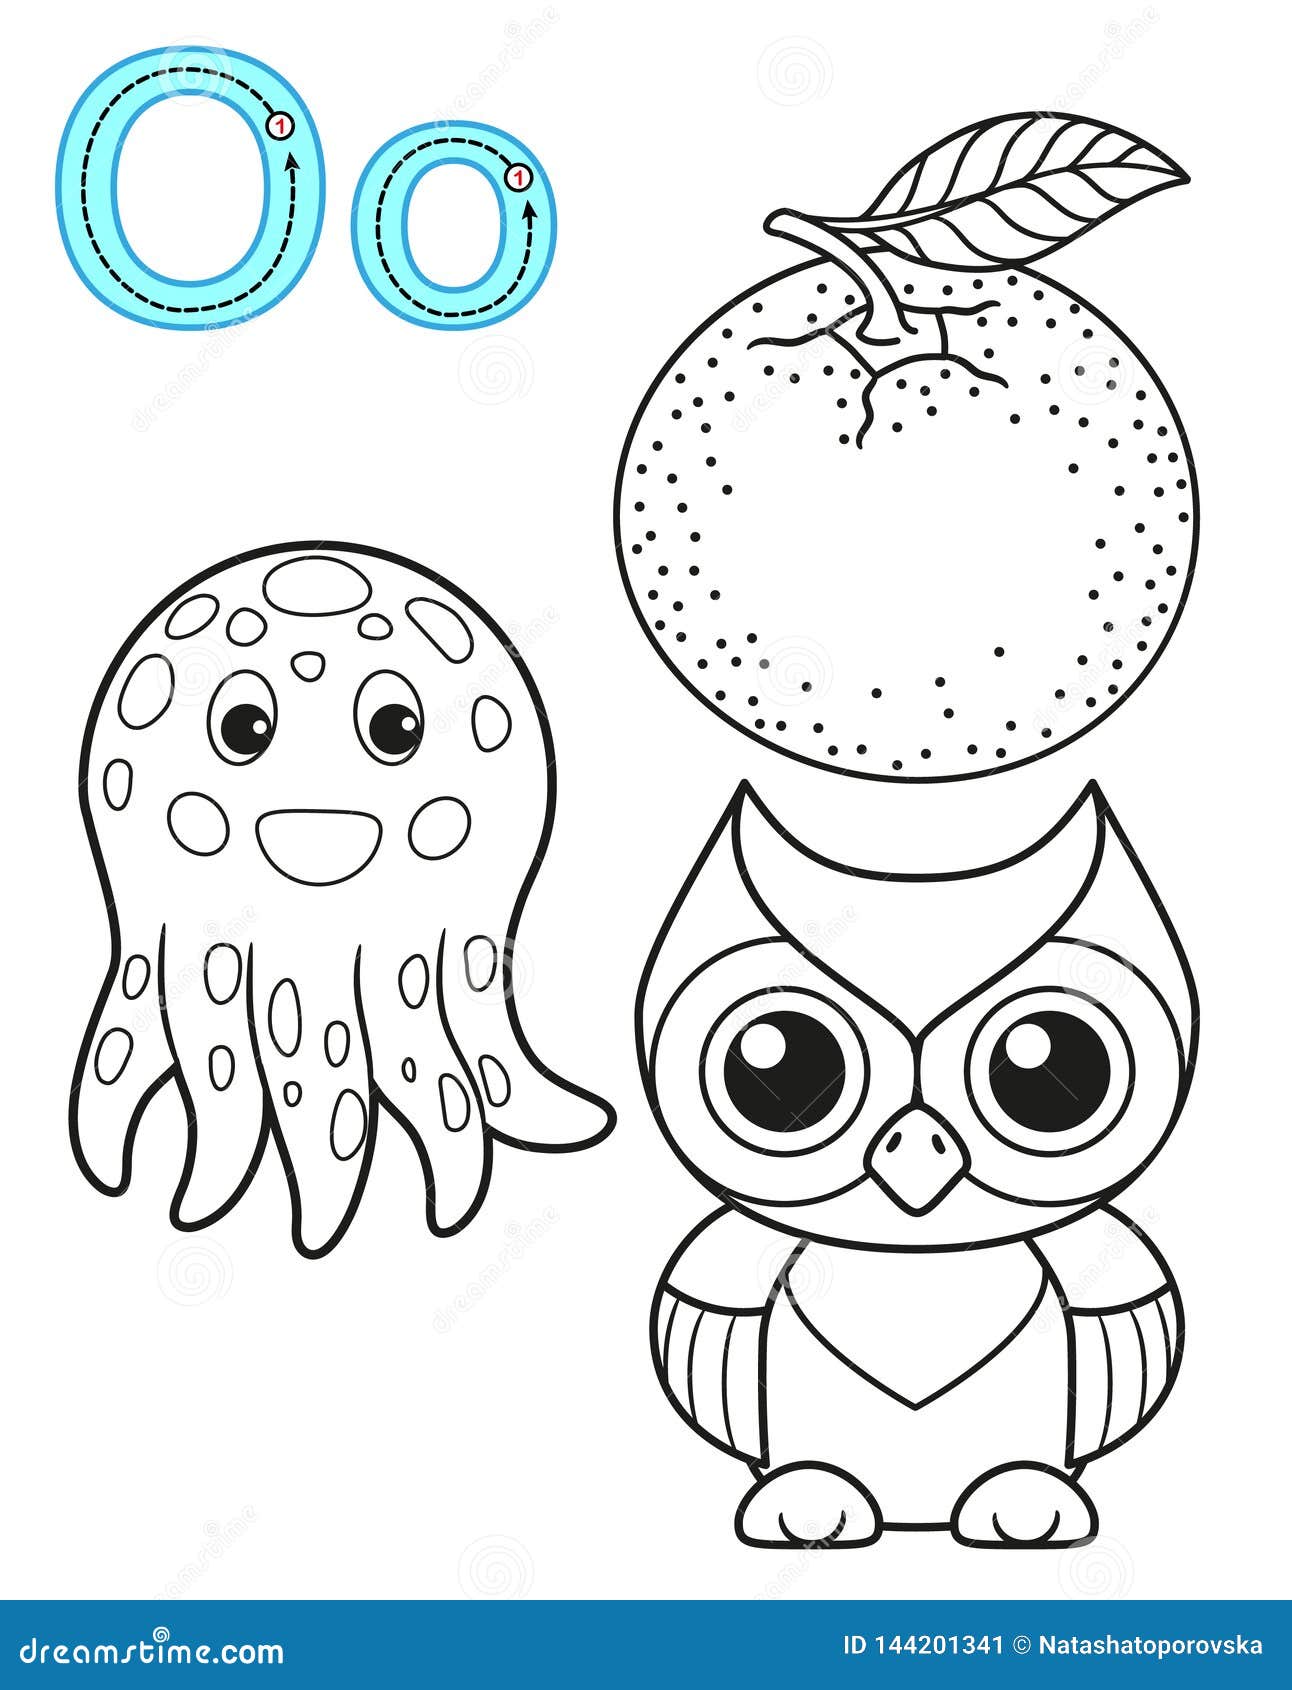 Printable coloring page for kindergarten and preschool card for study english vector coloring book alphabet letter o stock vector